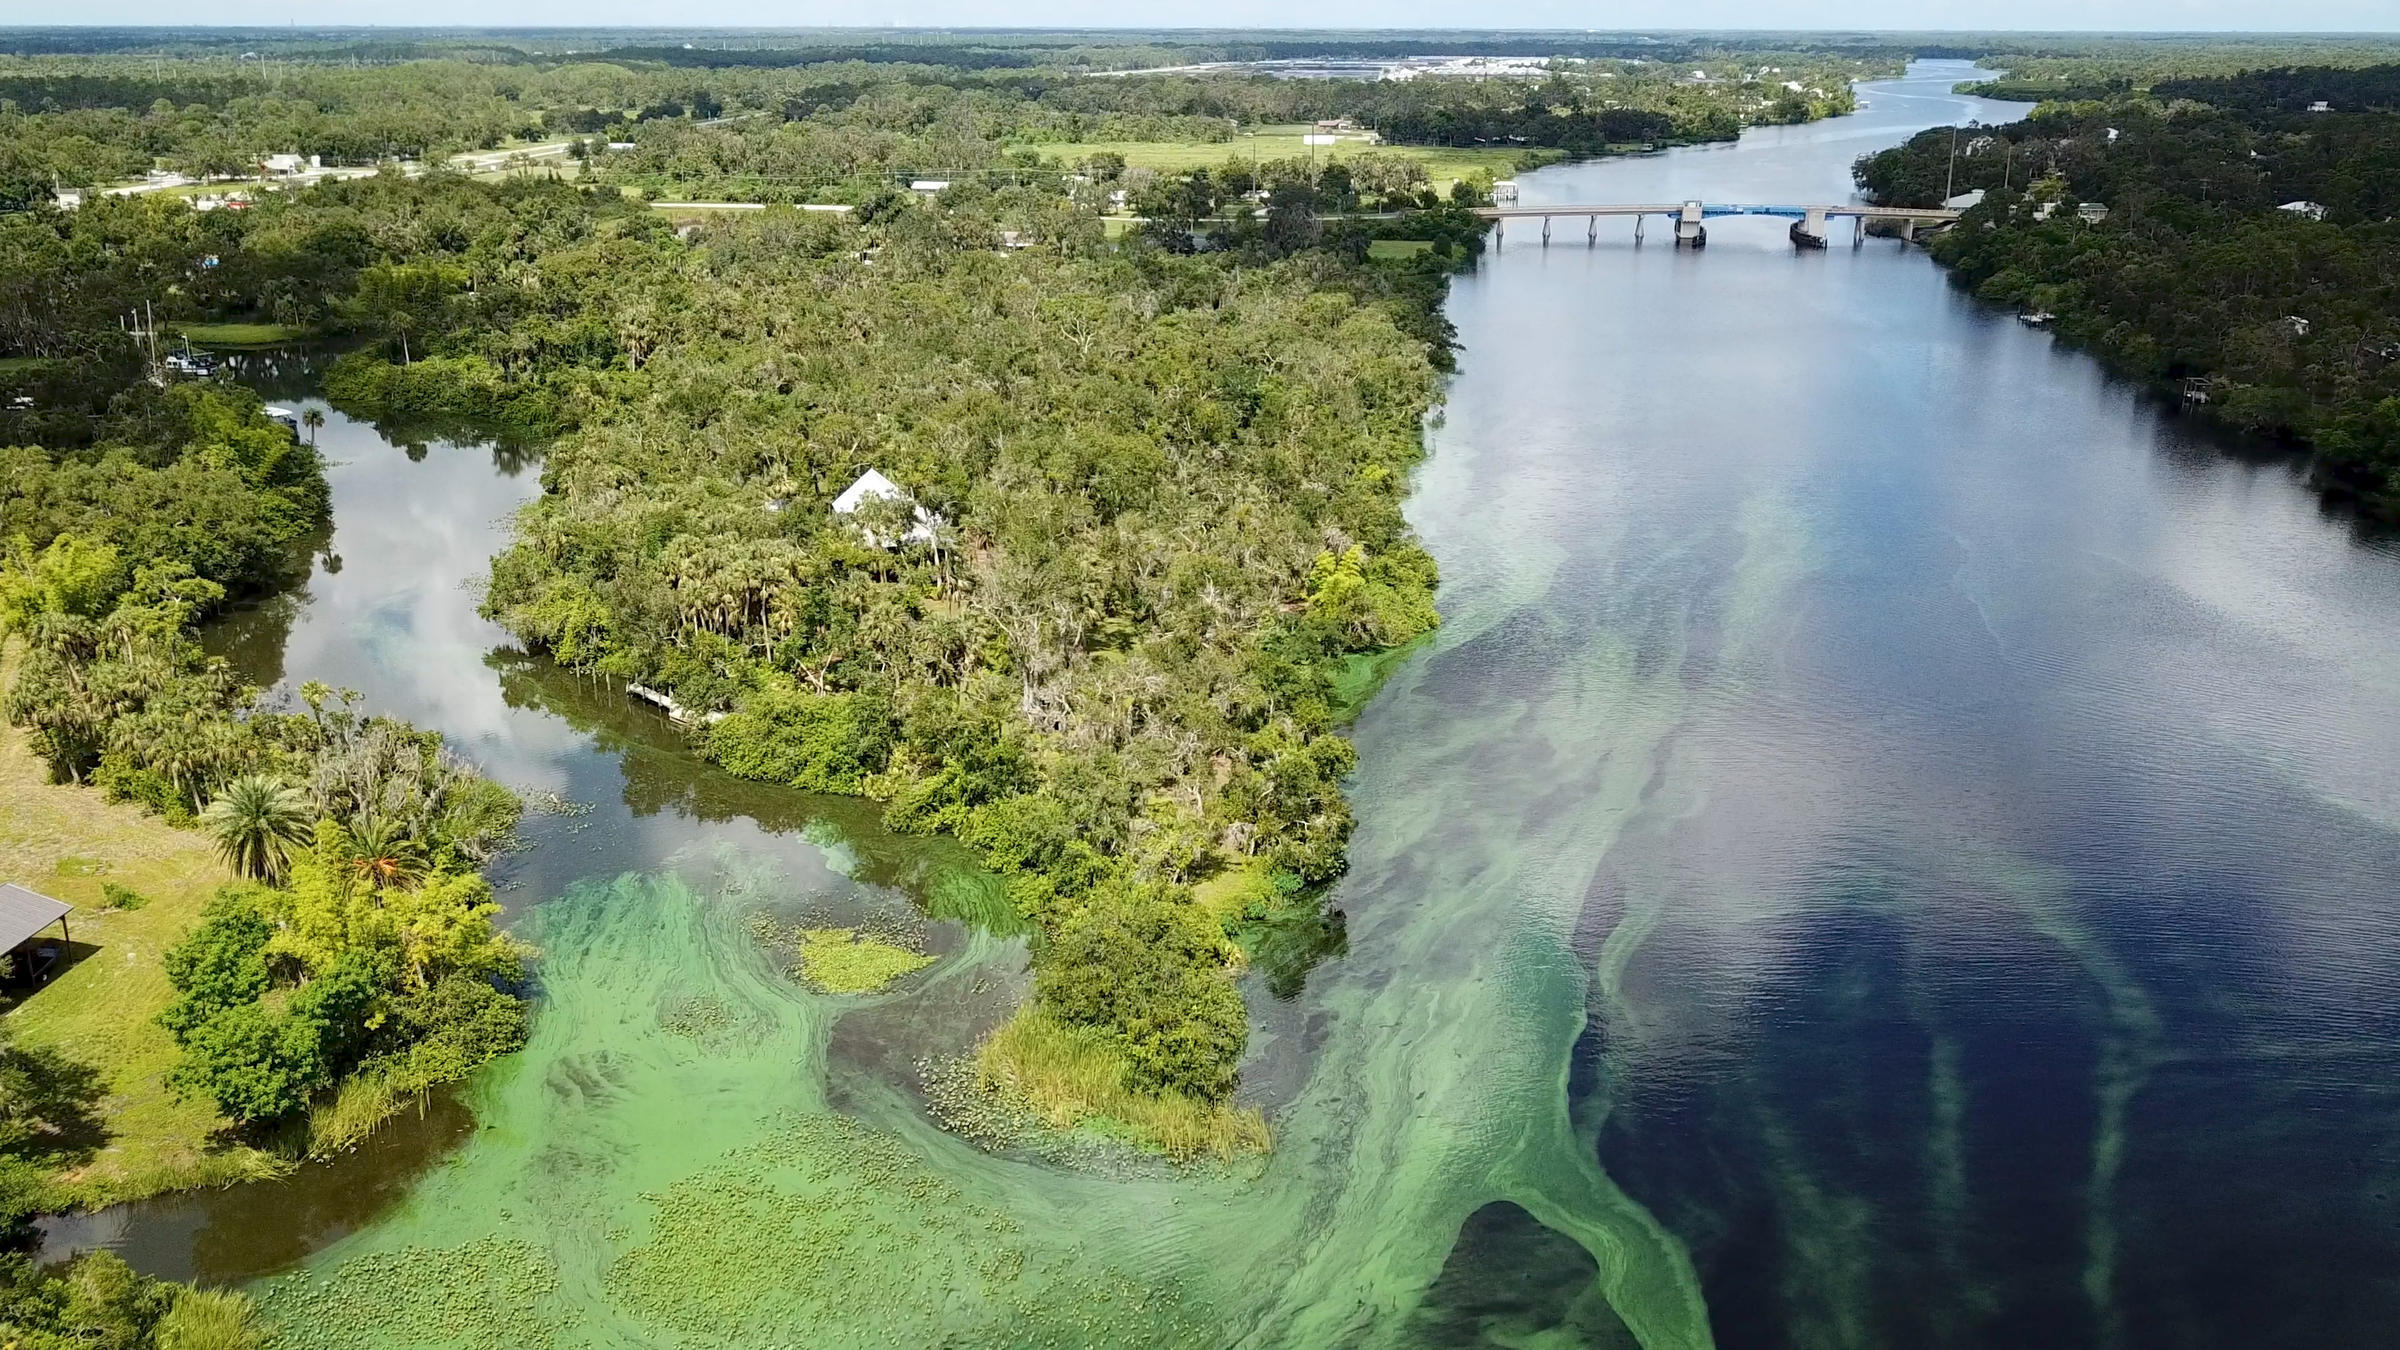 Measures That Would Help Address Florida's Harmful Algal Blooms Remain